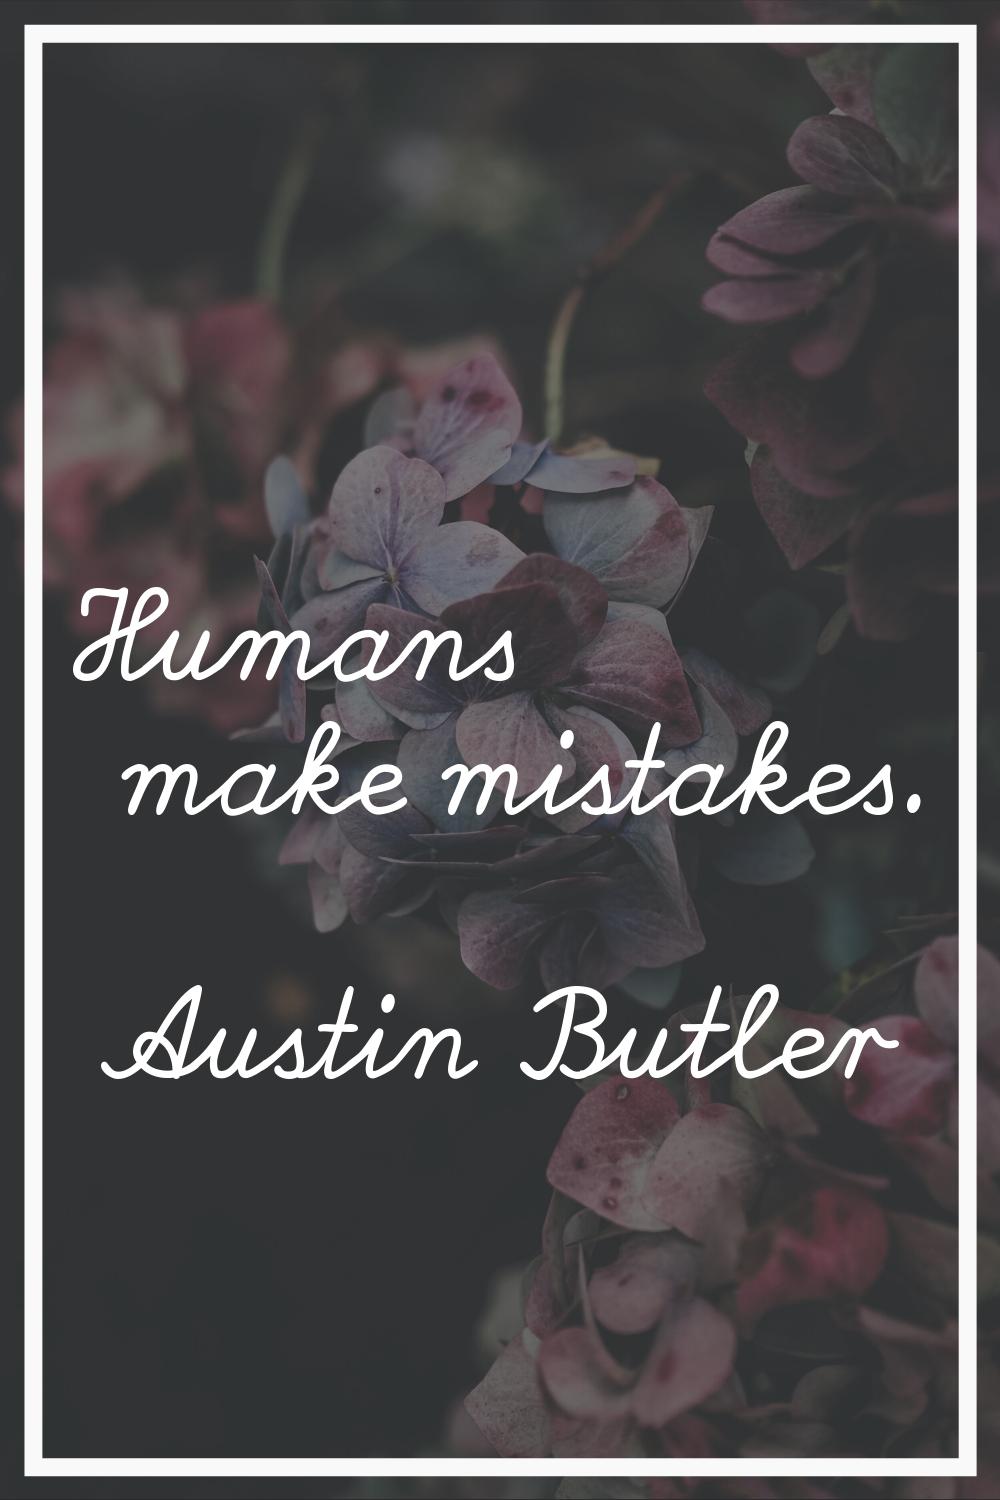 Humans make mistakes.